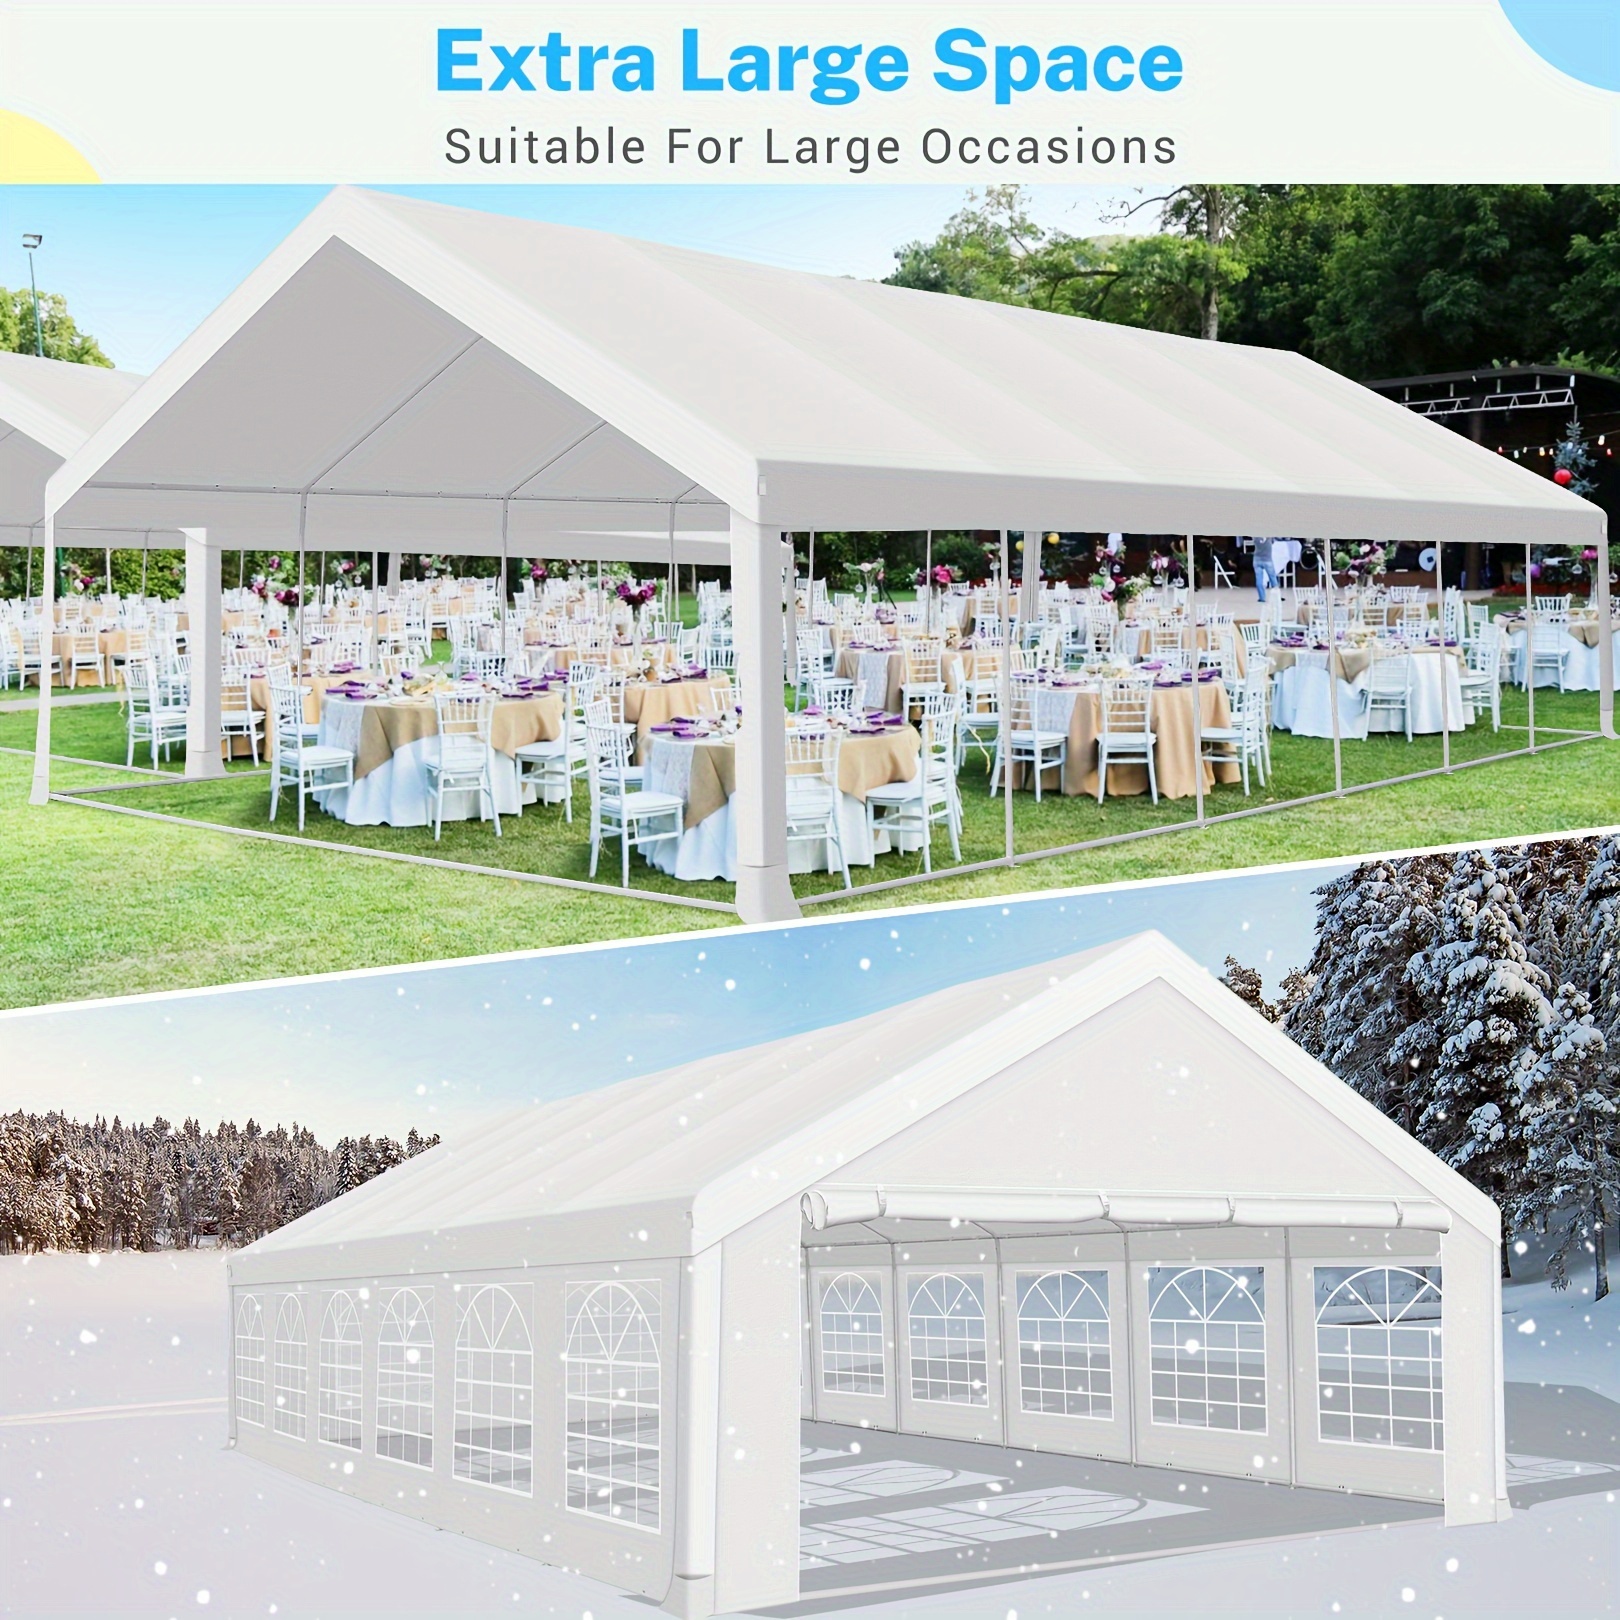 

Tooluck 20' X 40' Heavy Duty Party Tent, Carport Event Tent With Removable Sidewalls, Commercial Outdoor Canopy Wedding Tent, Uv 50+, Waterproof, White